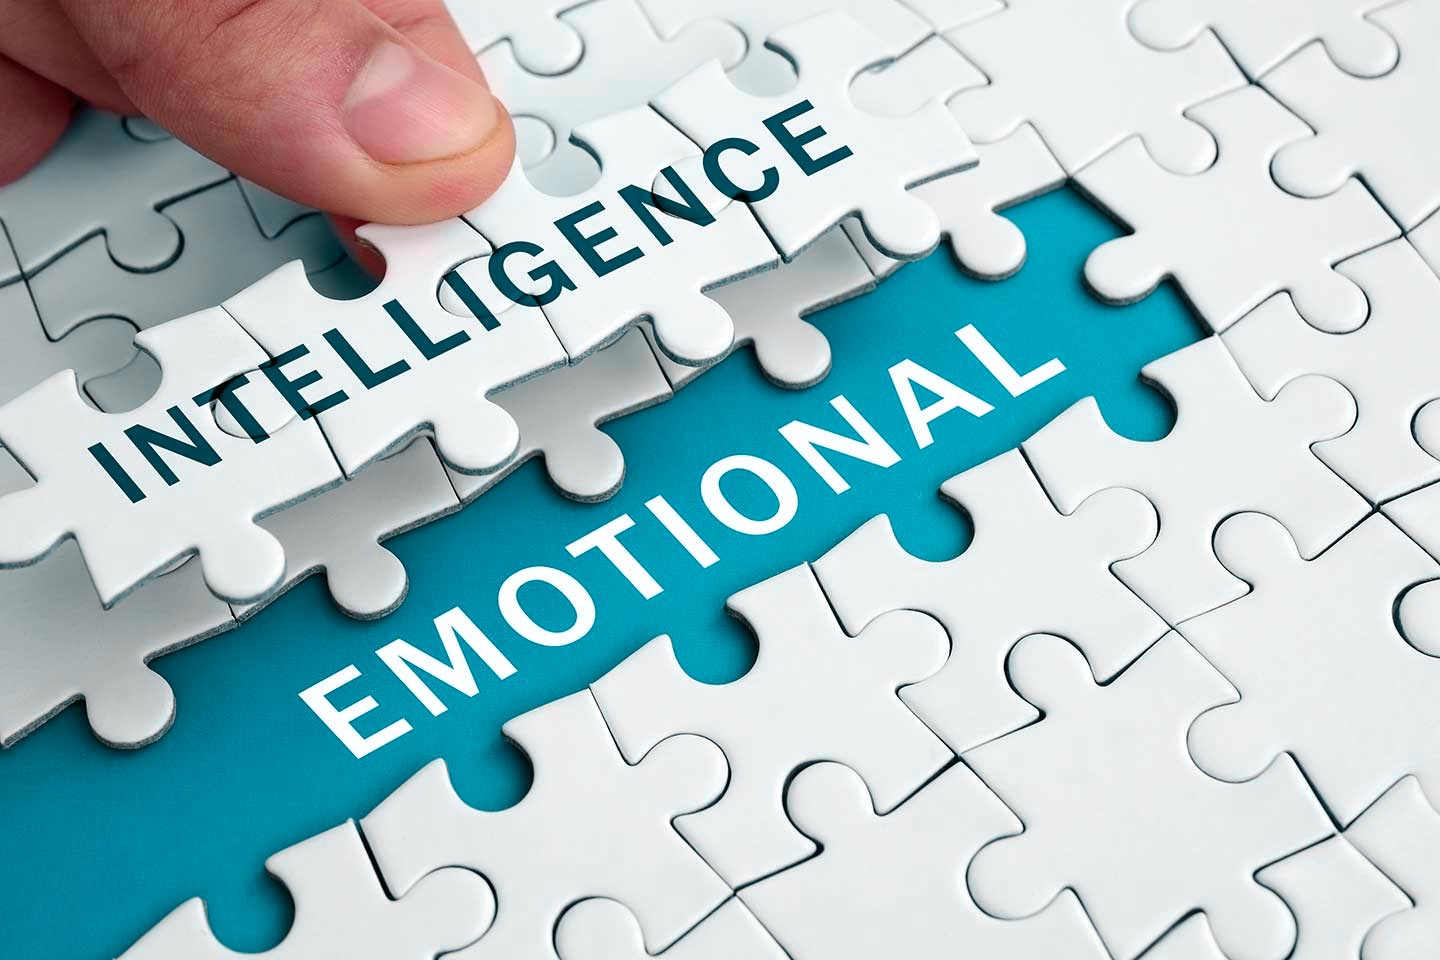 A Leader’s Guide To Emotional Intelligence (Part 1)